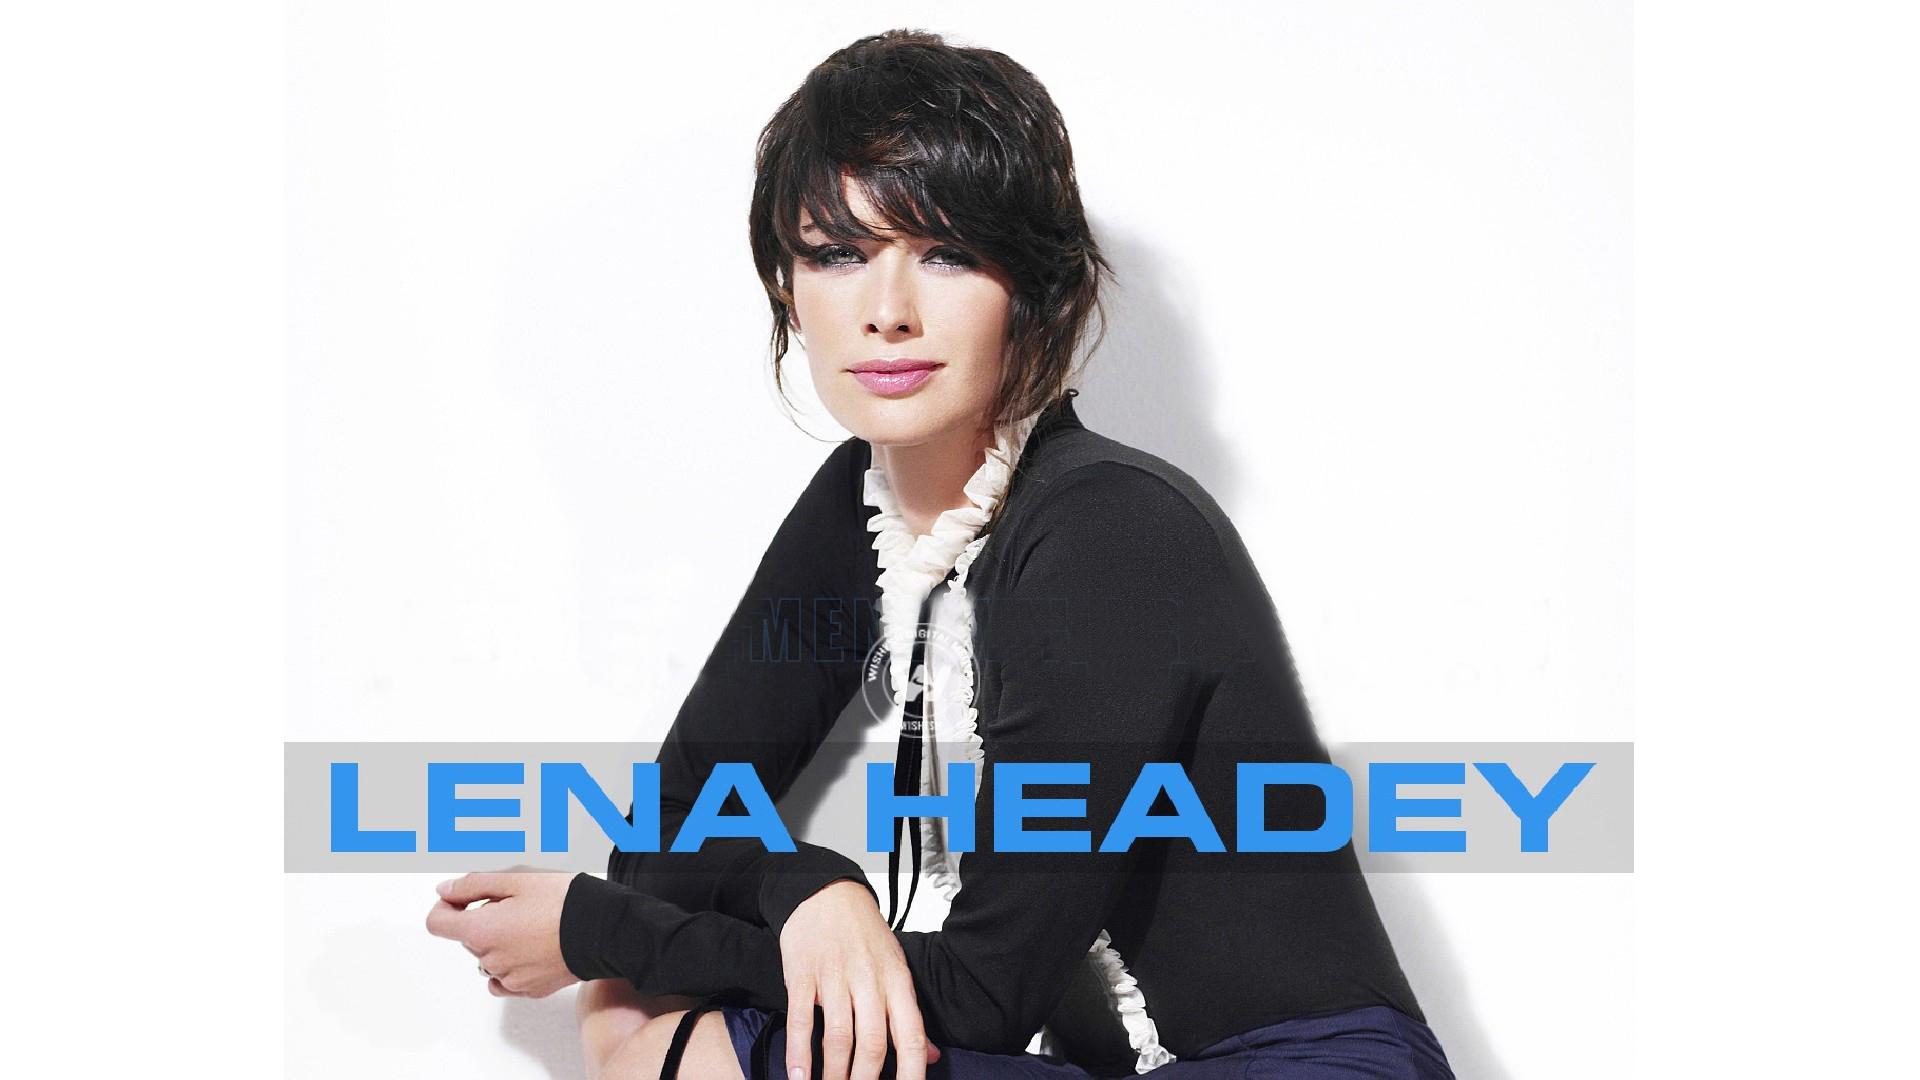 Lena Headey Latest Hot Wallpapers | Latest Gorgeous Images of Actress Lena Headey | Wallpaper 5of 10 | Latest Gorgeous Images of Actress Lena Headey